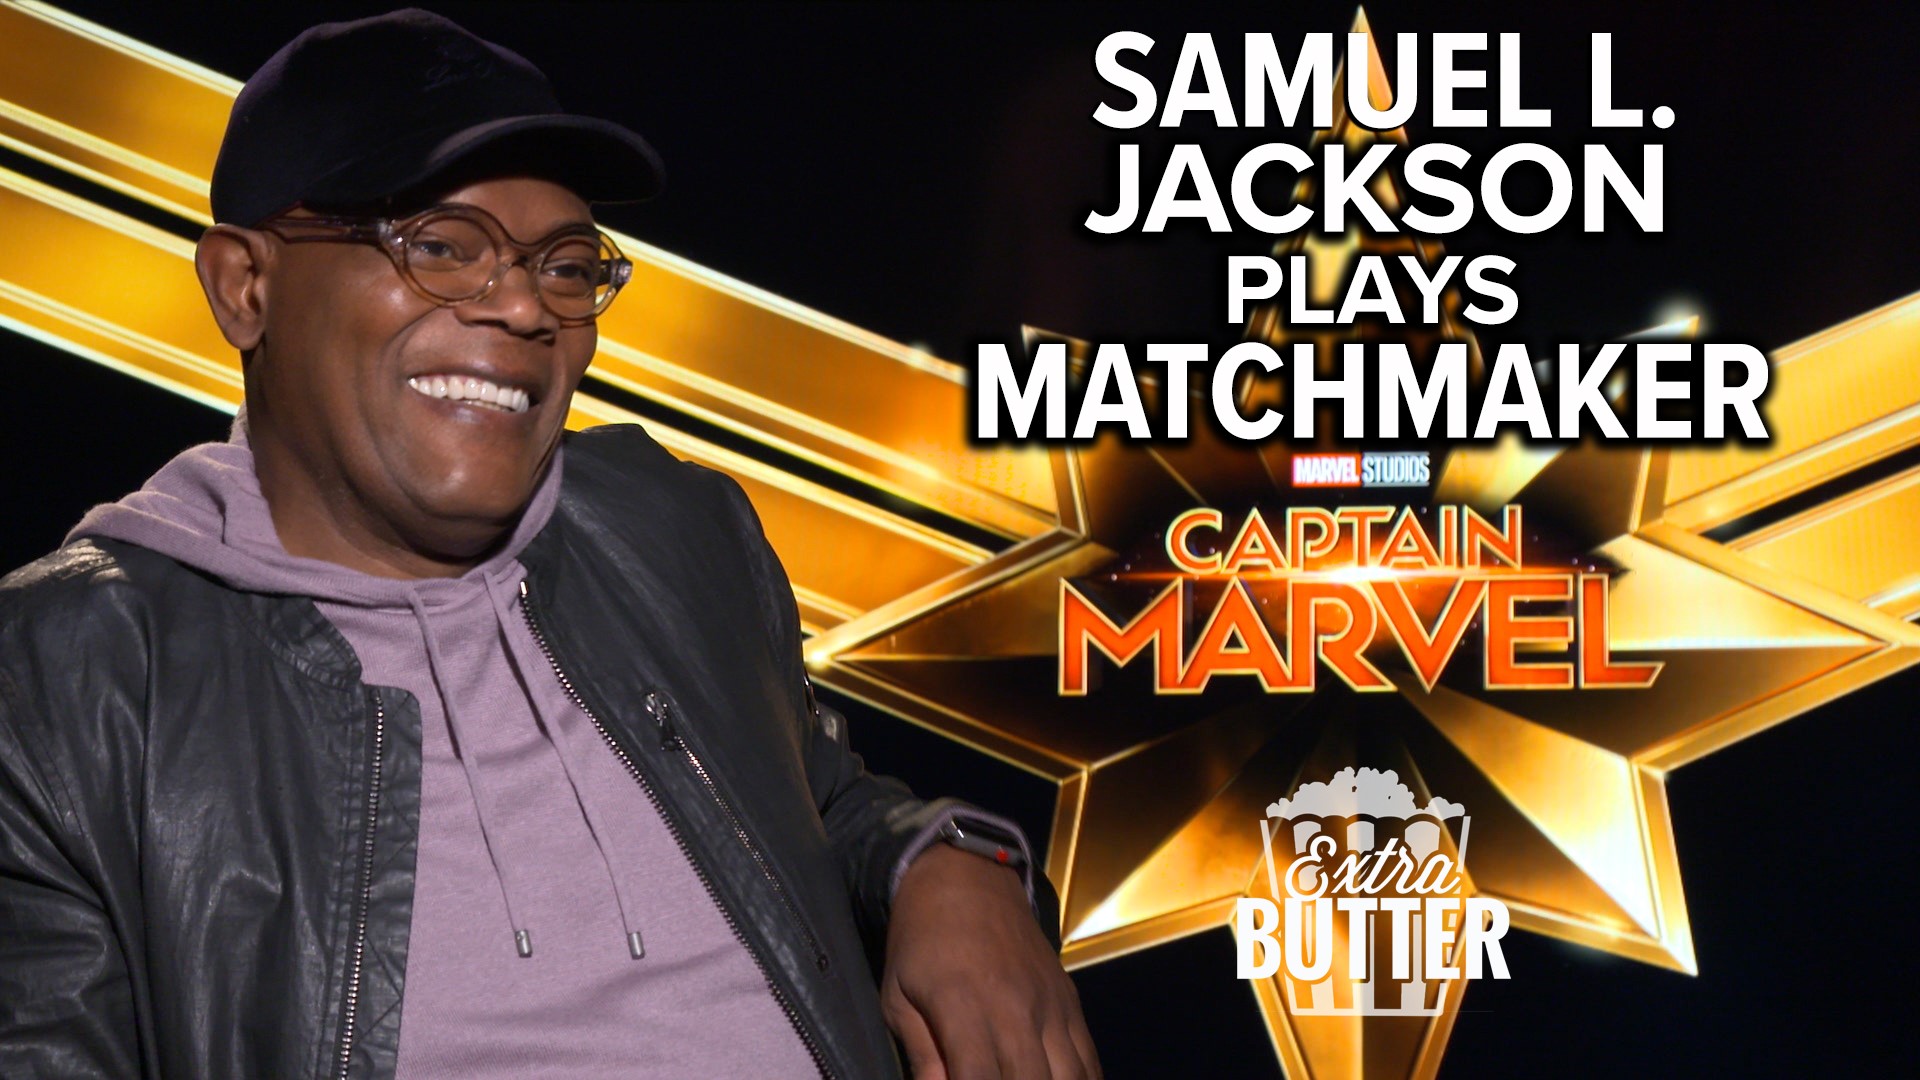 Samuel L. Jackson is updated on how he helped seal an engagement for interviewer Kelly Savanna Deaton. Jackson also talks about playing a younger Nick Fury in the #MCU and why he does not miss Blockbuster. He also shares something new he learned about Brie Larson. Interview arranged by Walt Disney Studios Motion Pictures.